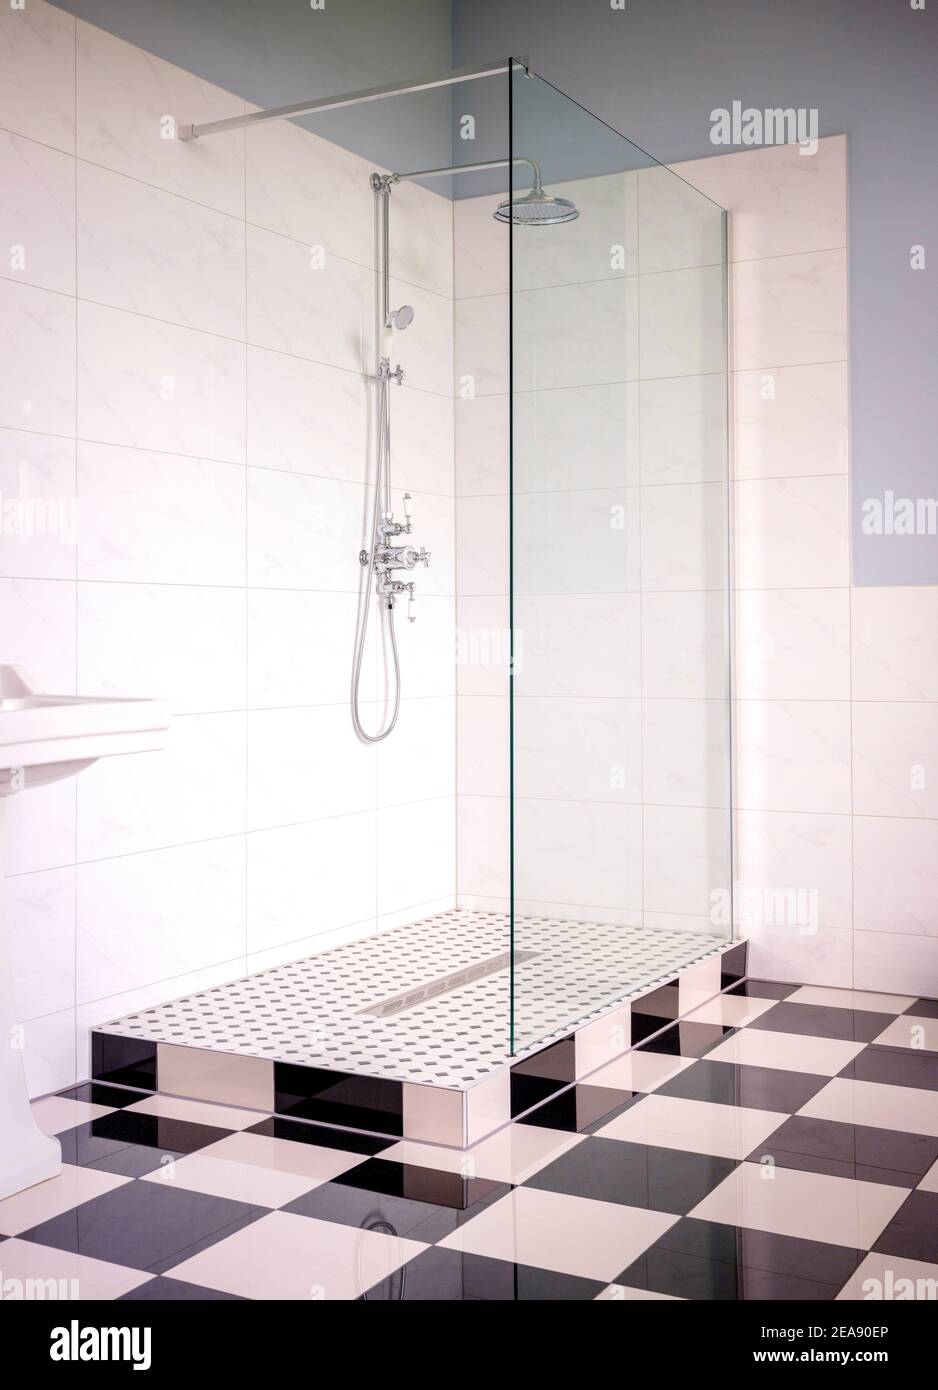 Classic, contemporary living: a double shower in a bathroom finished with black and white floor tiles. Stock Photo